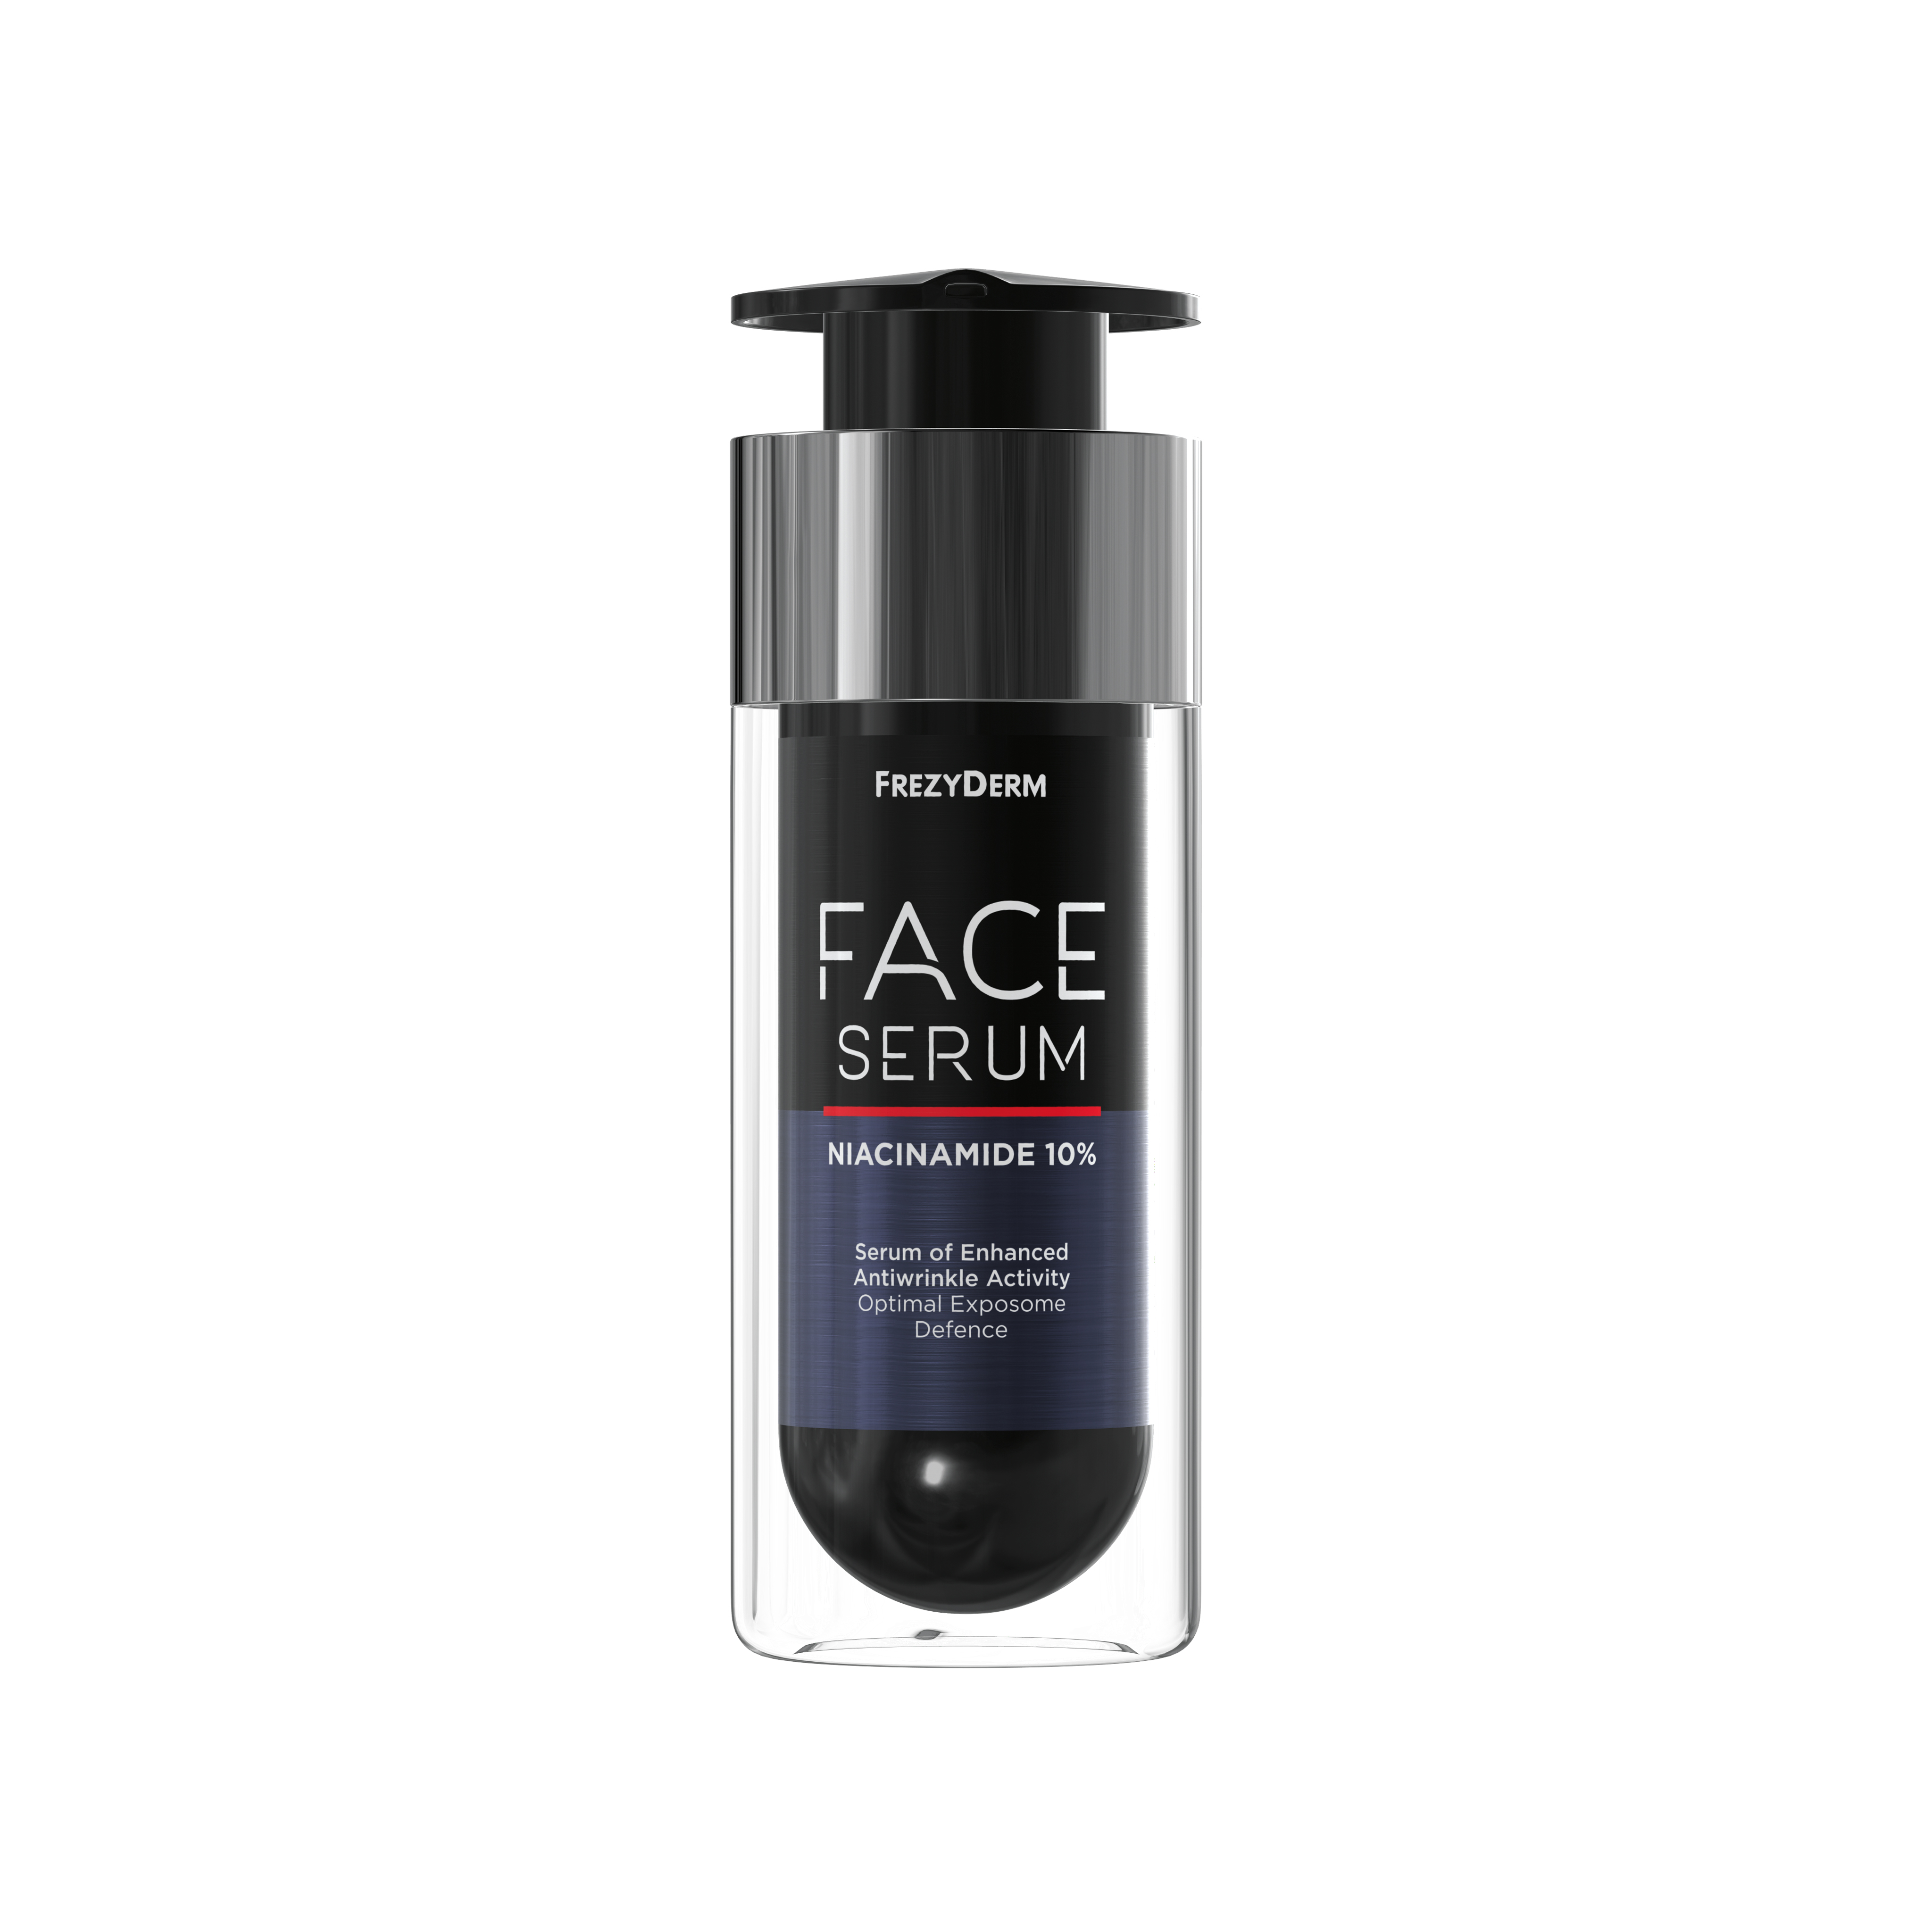 FACE SERUMS - Niacinamide 10% - NEW